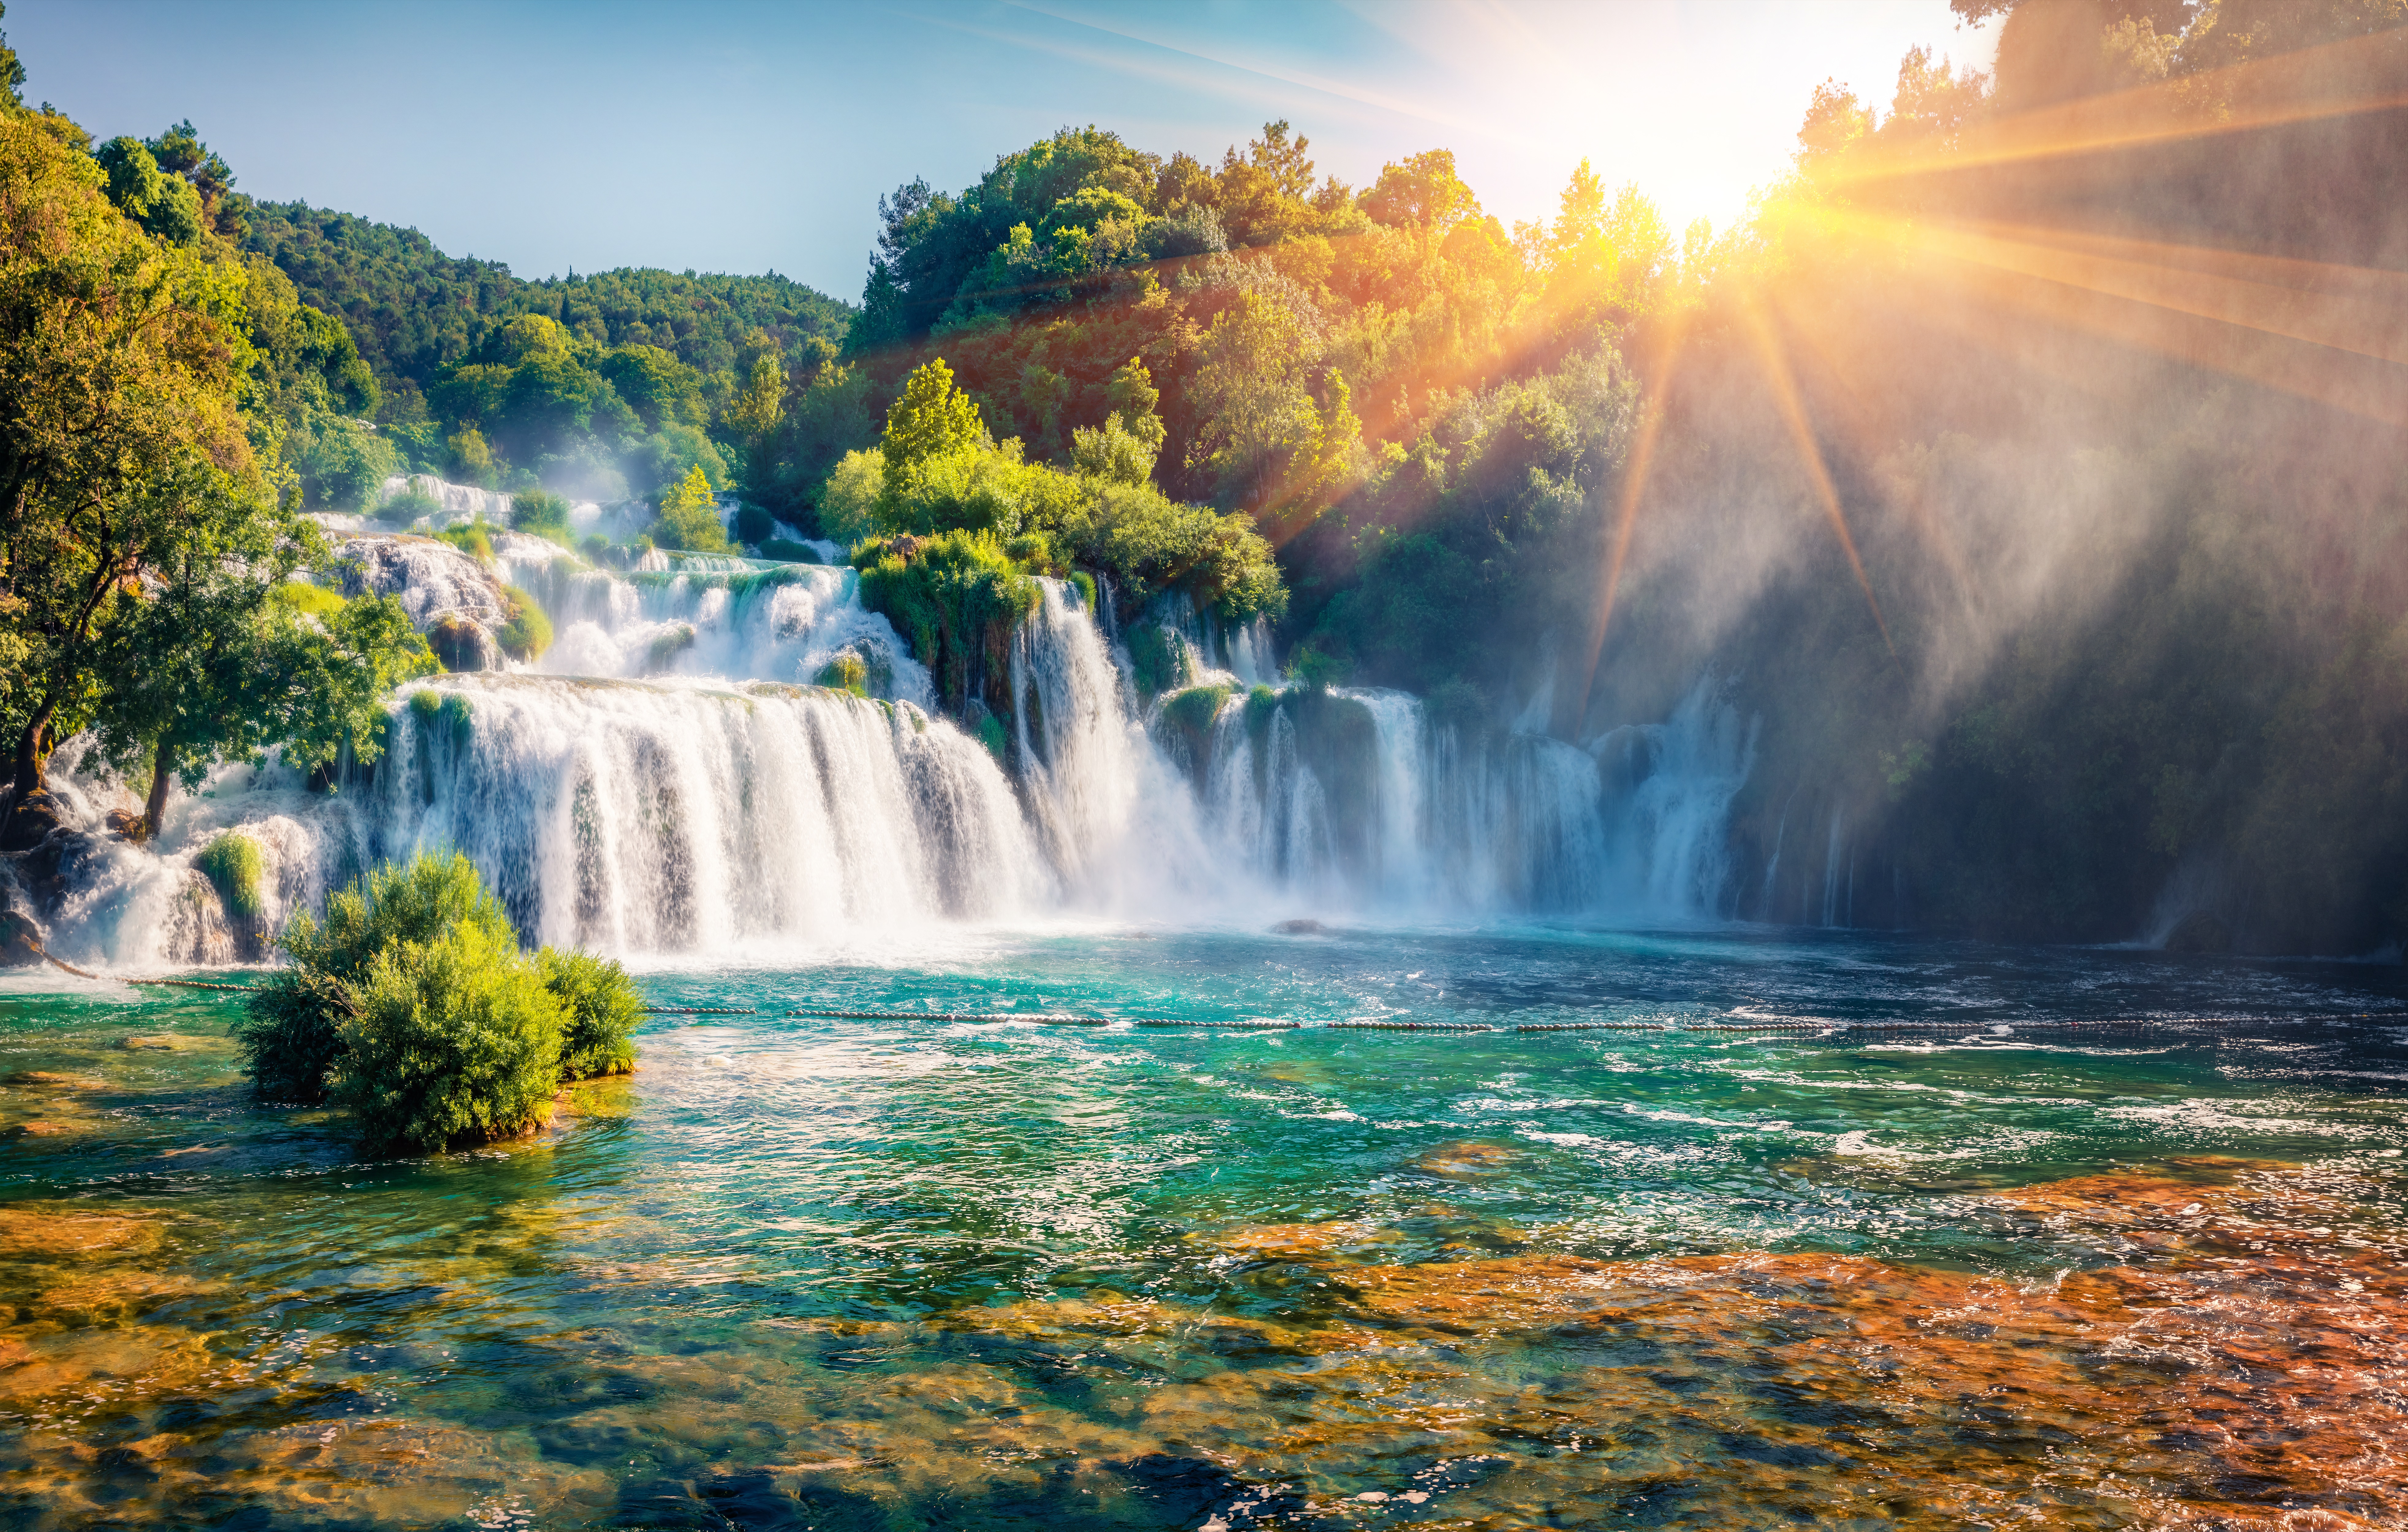 Waterfall Landscape Nature Croatia Sun Sky Trees Forest Water River Sunlight Plitvice Lakes National 7857x5000